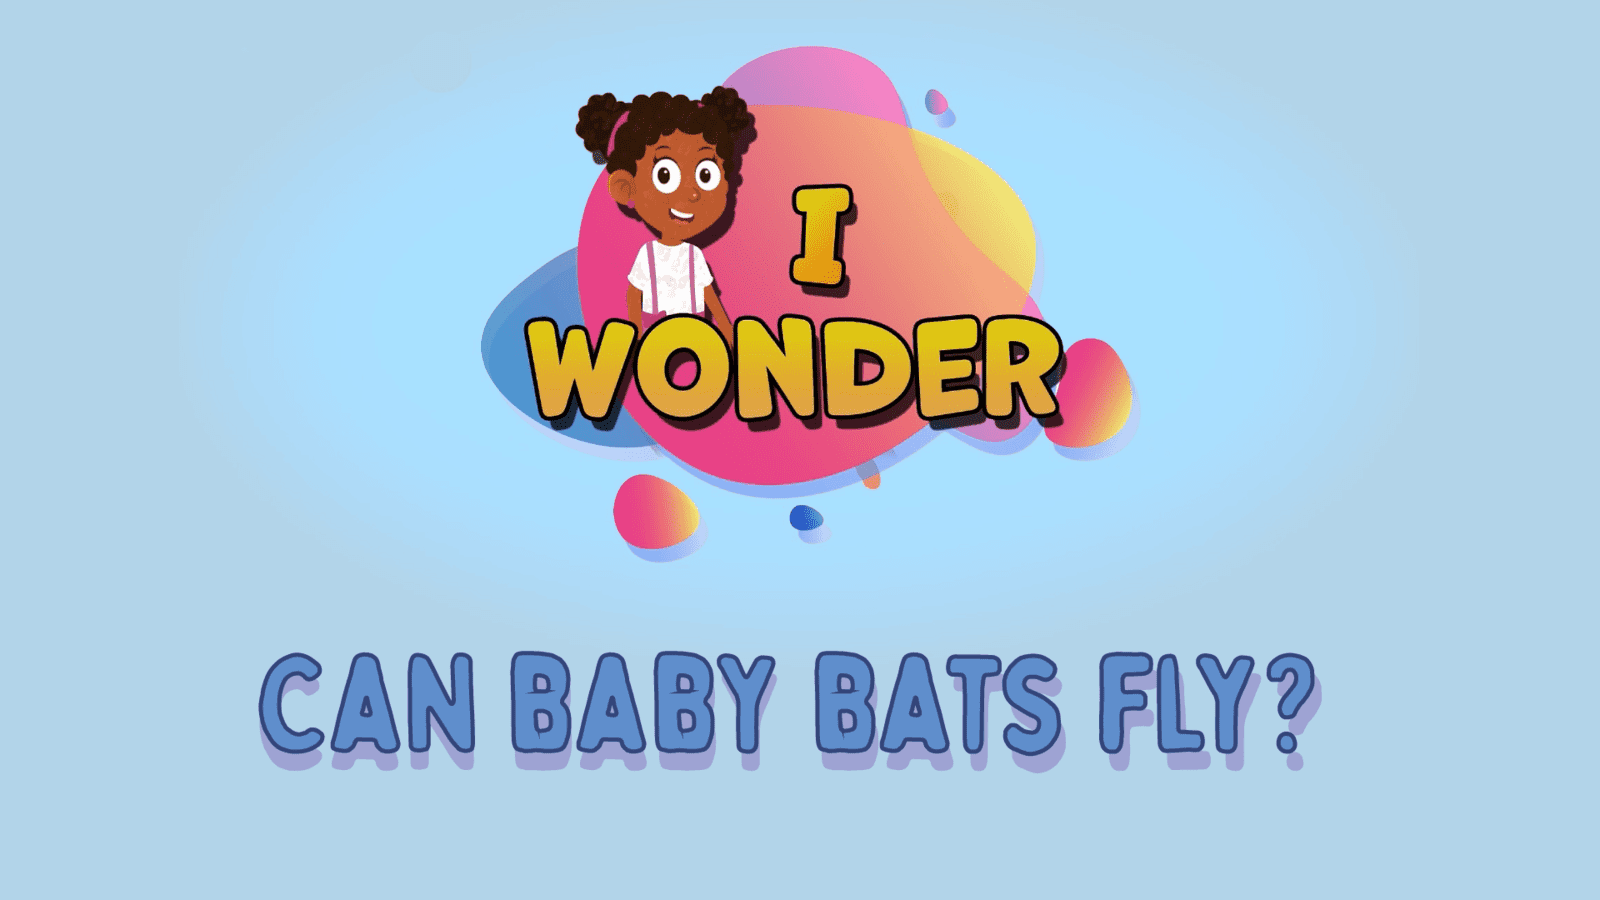 Can Baby Bats Fly?